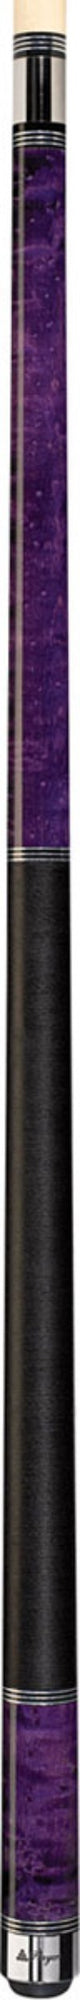 Players C-965 Pool Cue